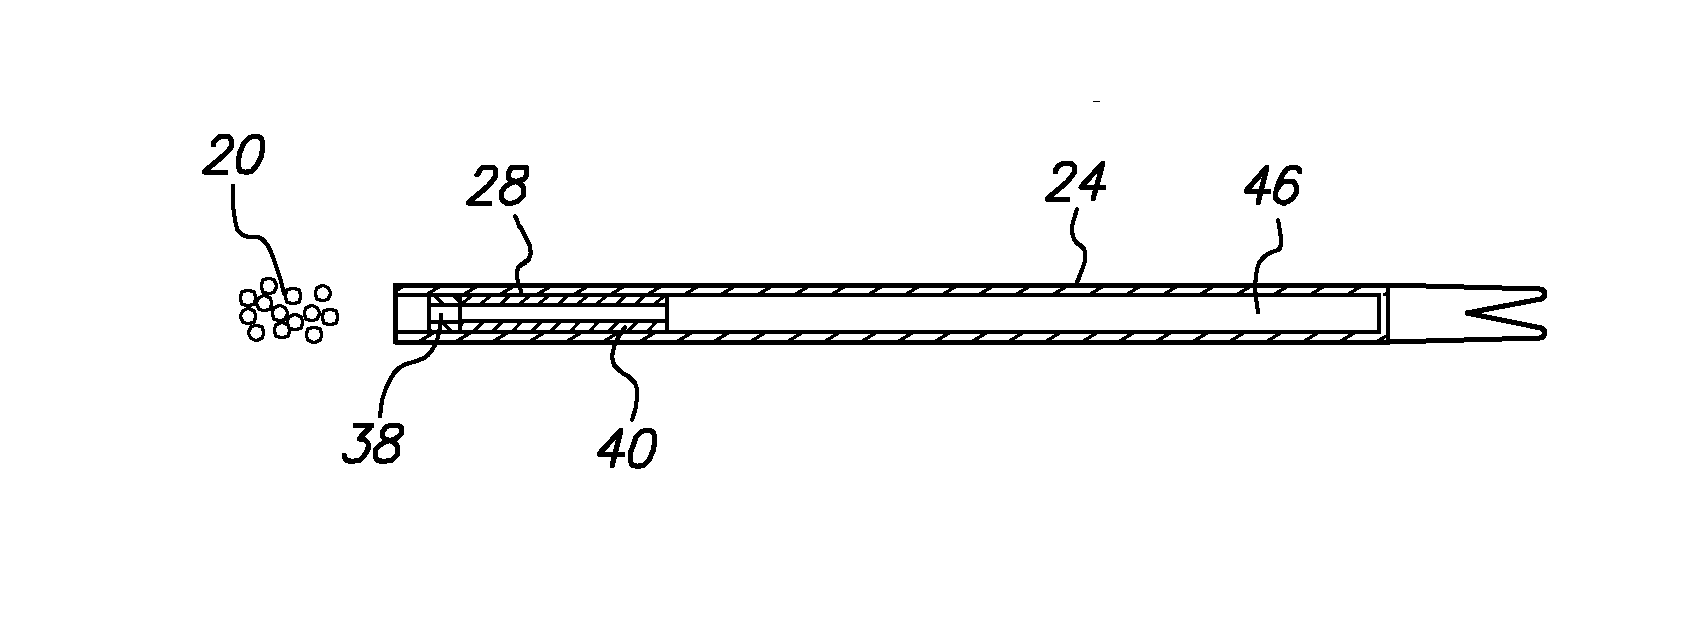 Two-phase projectile with a proximal compression chamber